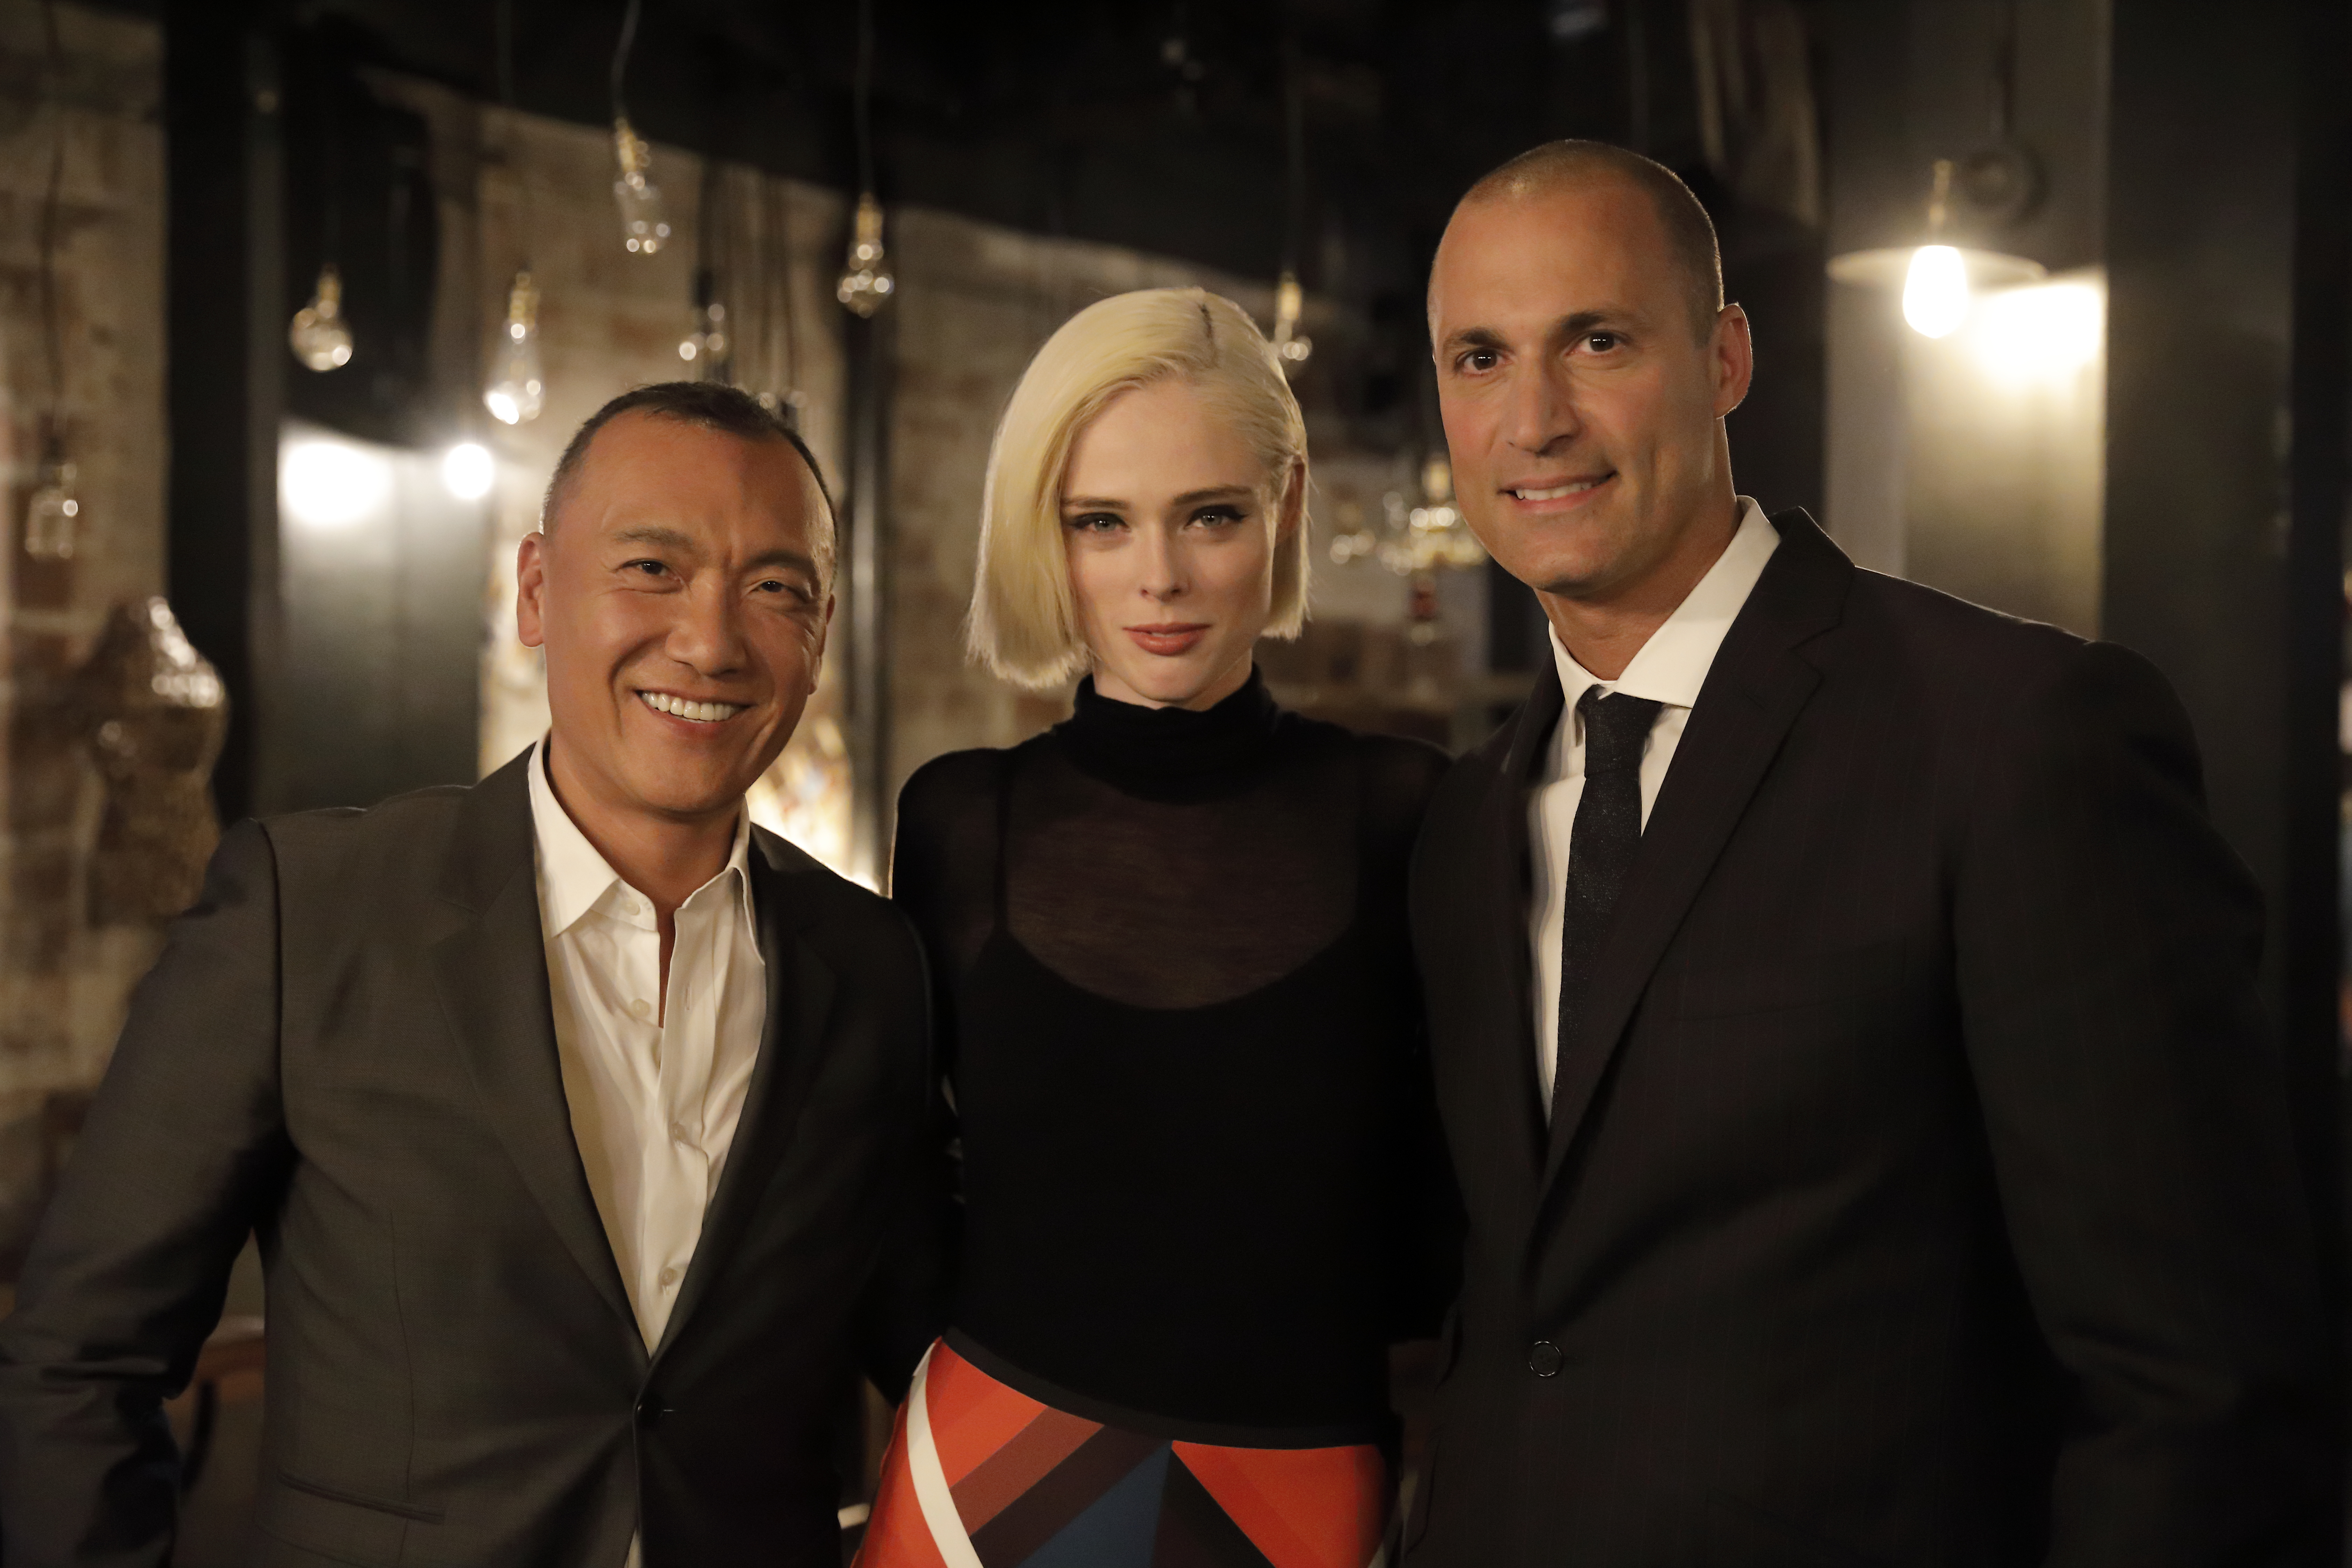 Nigel Barker on His New Show, Top Photographer...